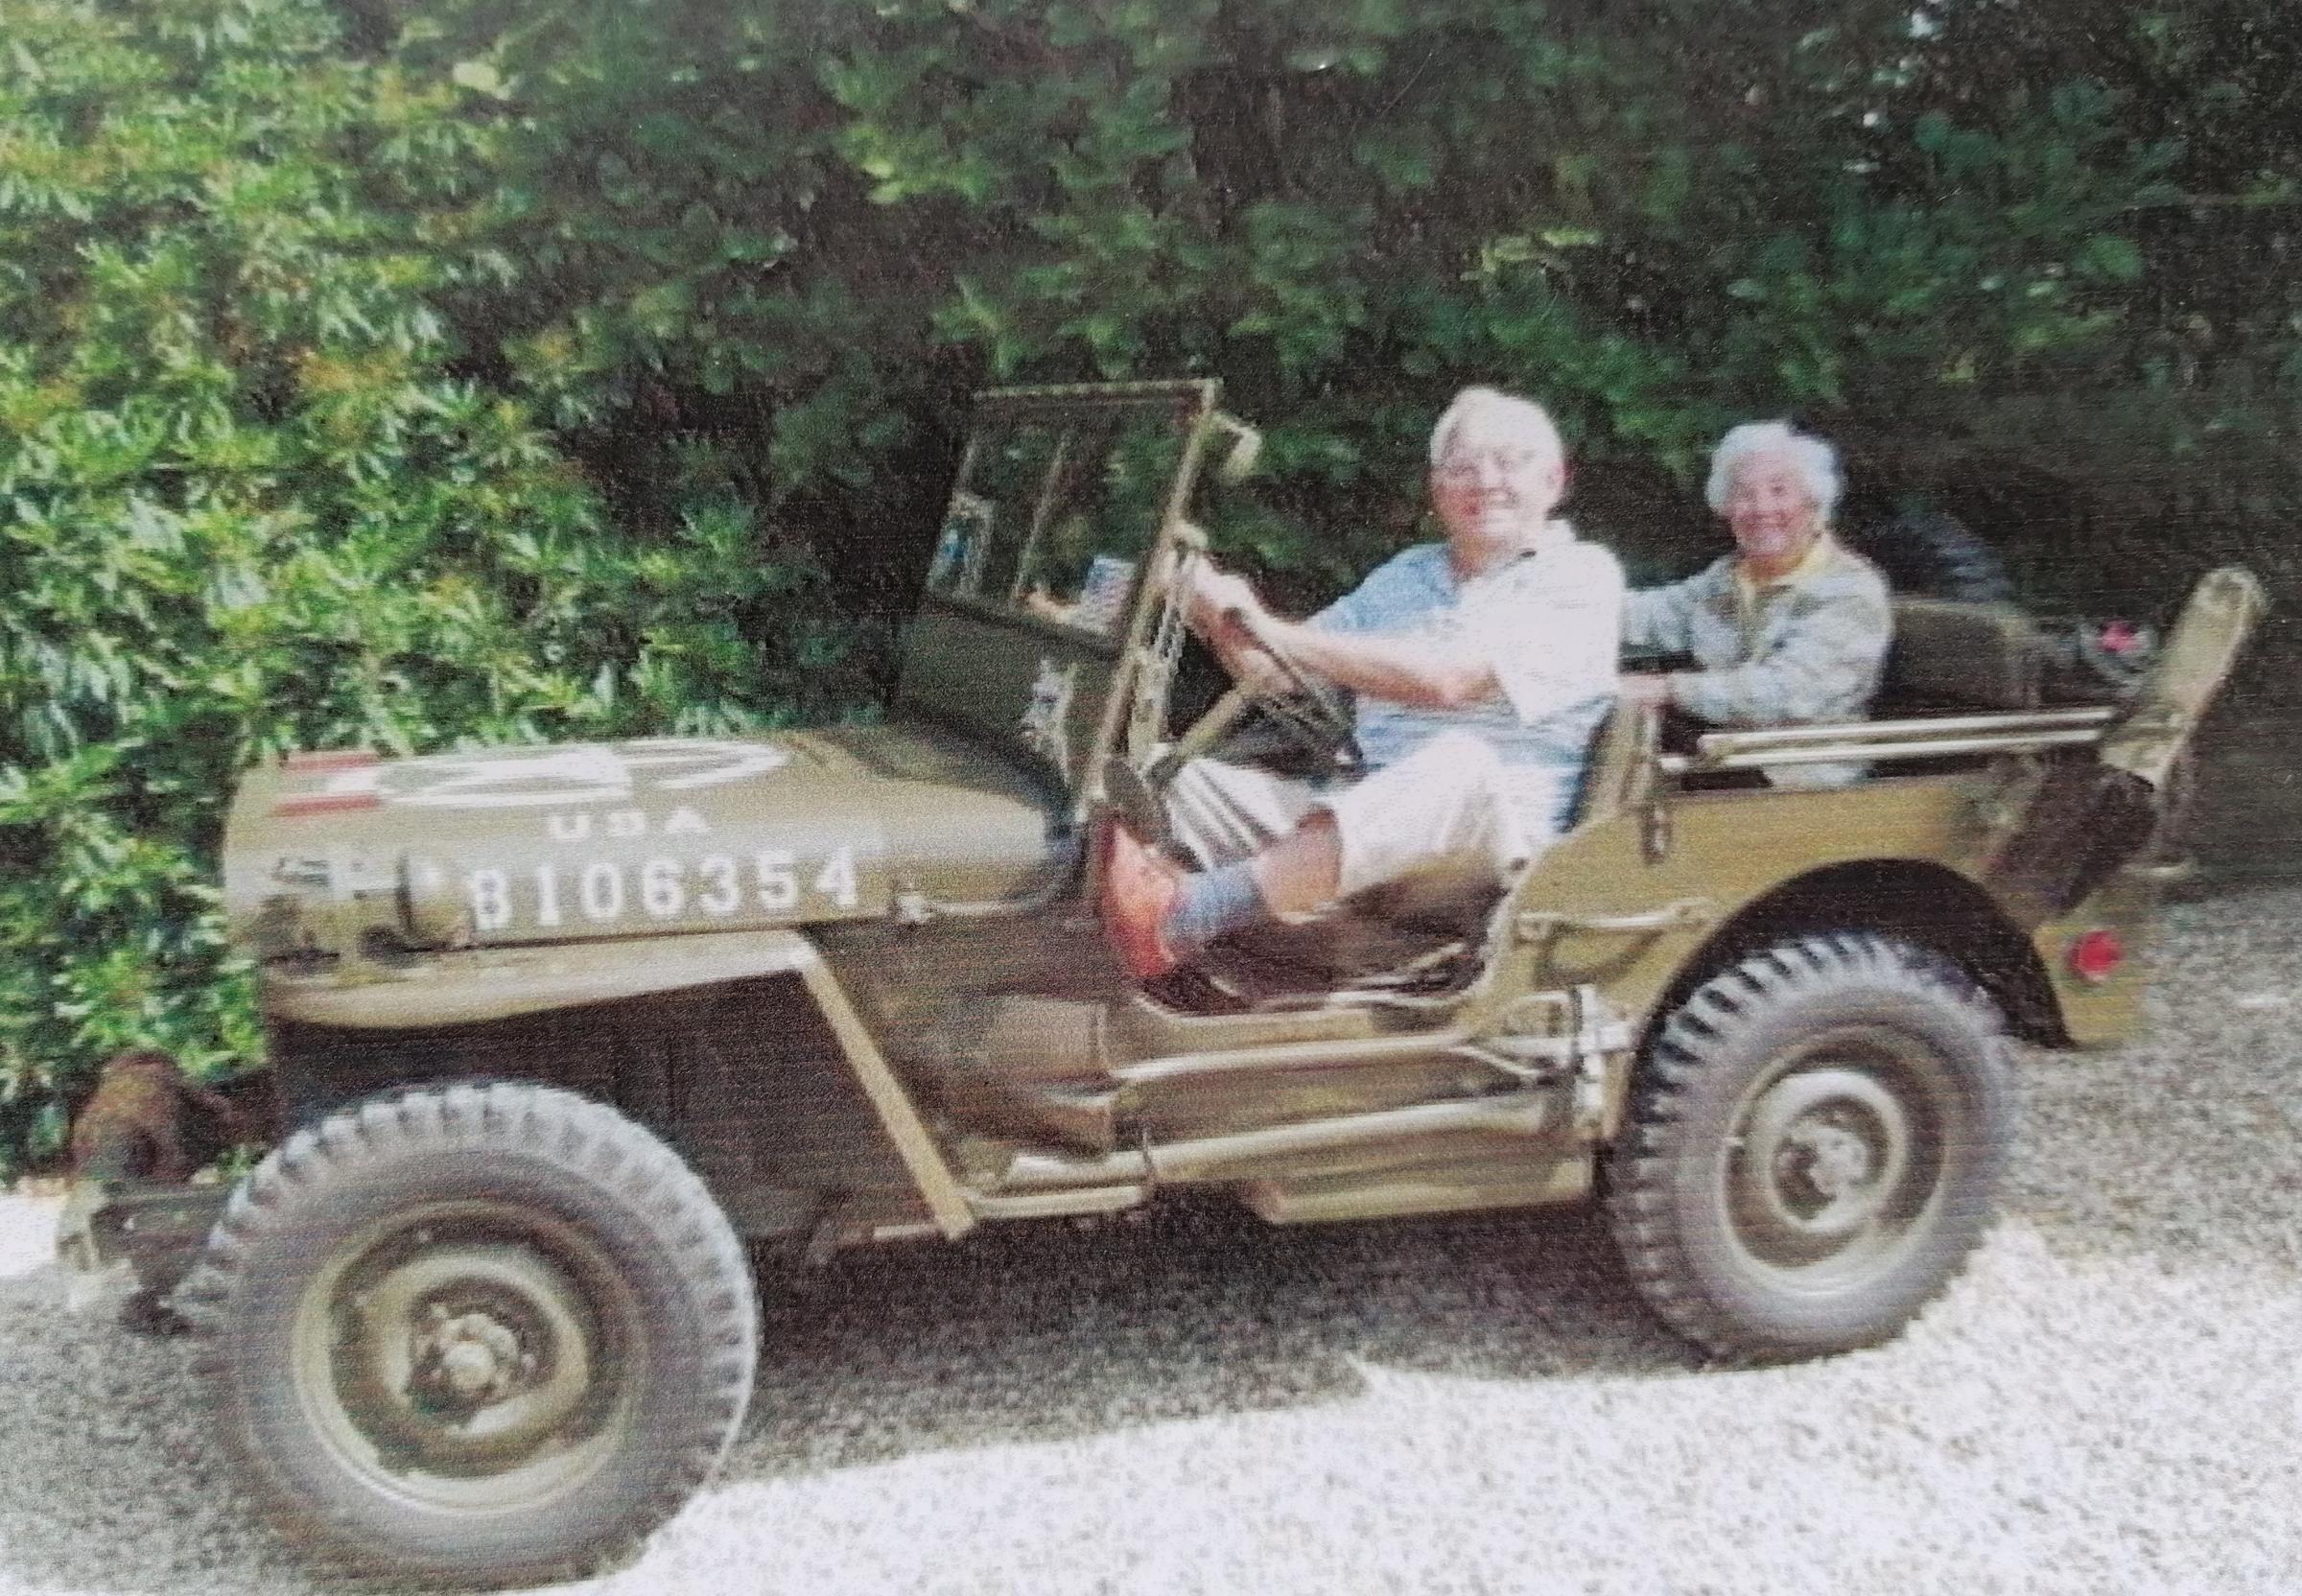 Kenneth and Joan in an army jeep, similar to the one he would have driven during the war.